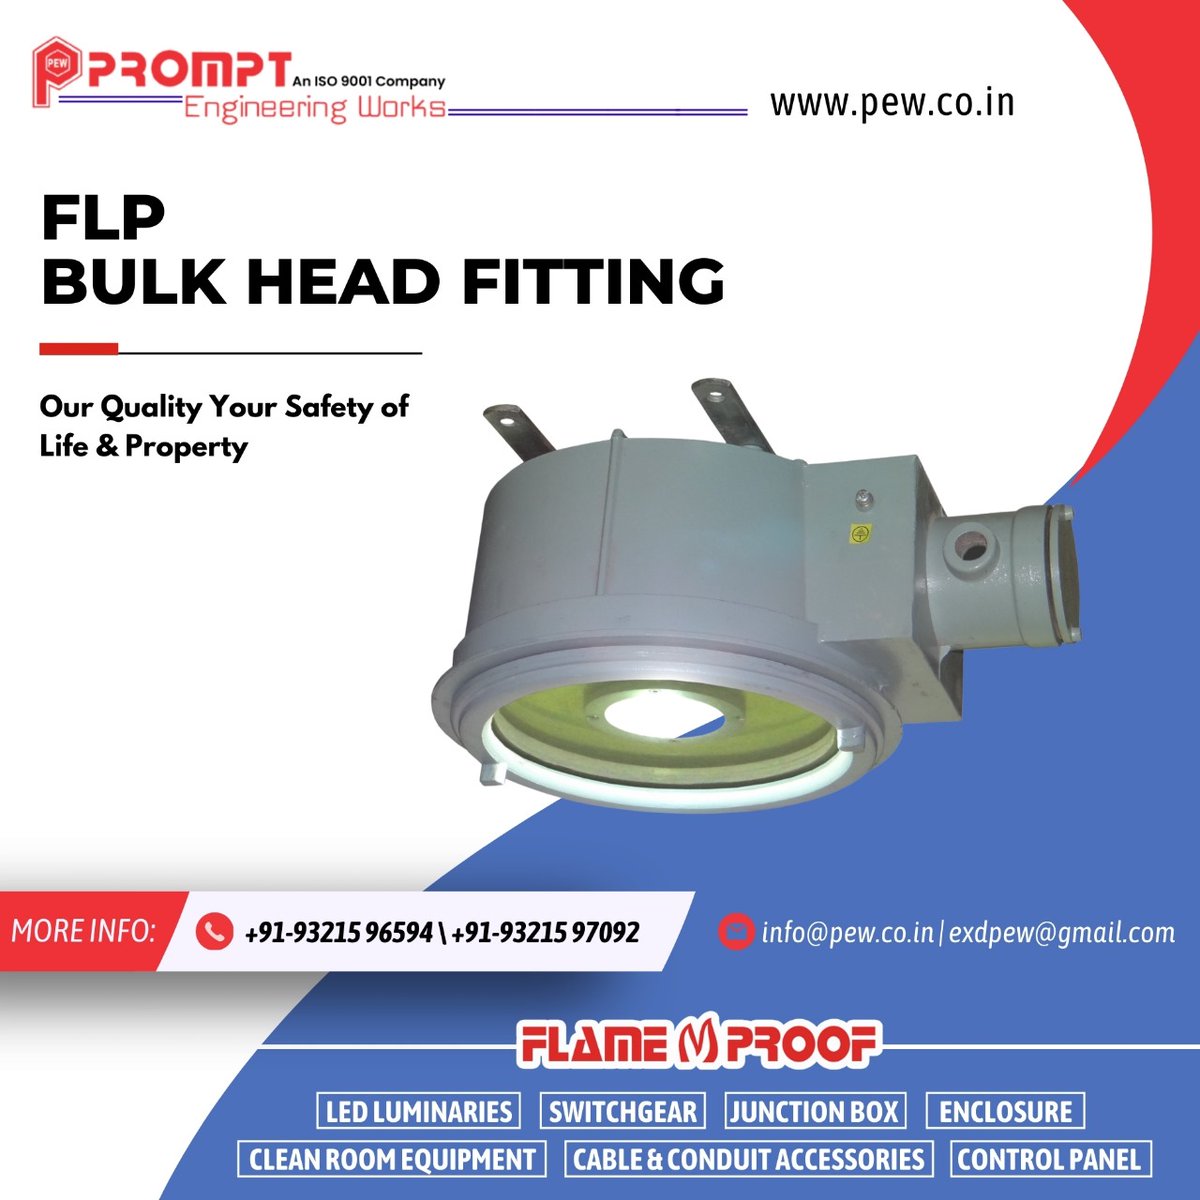 A bulkhead fitting is a type of mechanical connector used to create a leak-proof passage through a wall or barrier.
Visit for more details or call us at:-
Mob:- +91 9321596594
     91 9321597092
Email:- info@pew.co.in
exdpew@gmail.com
pew.co.in
#pew #engineeringwork